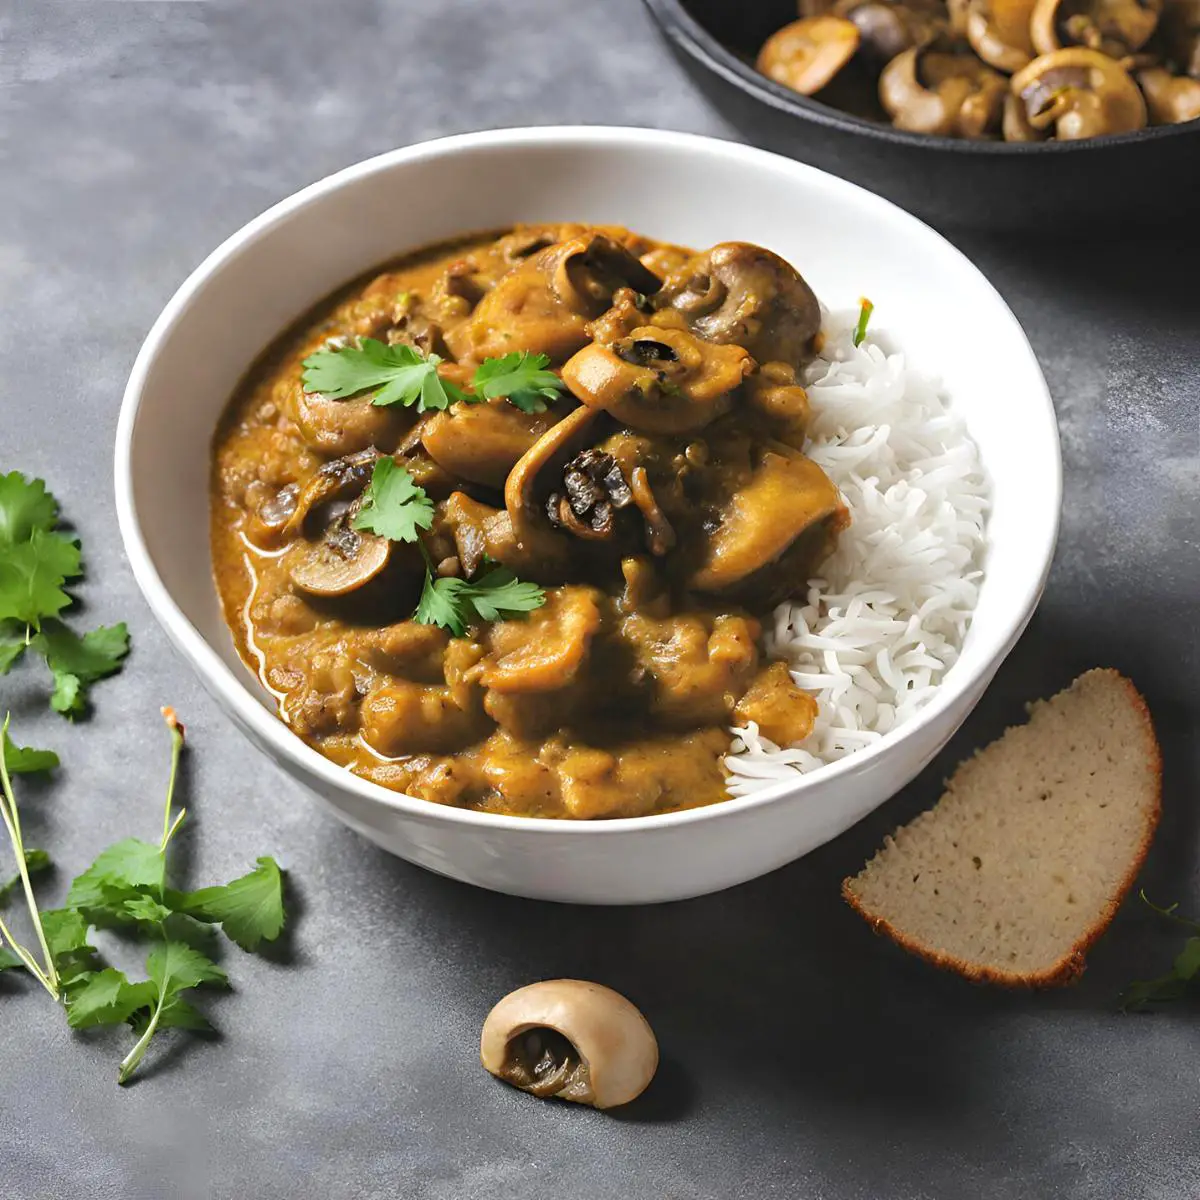 A bowl with mushroom curry on rice.